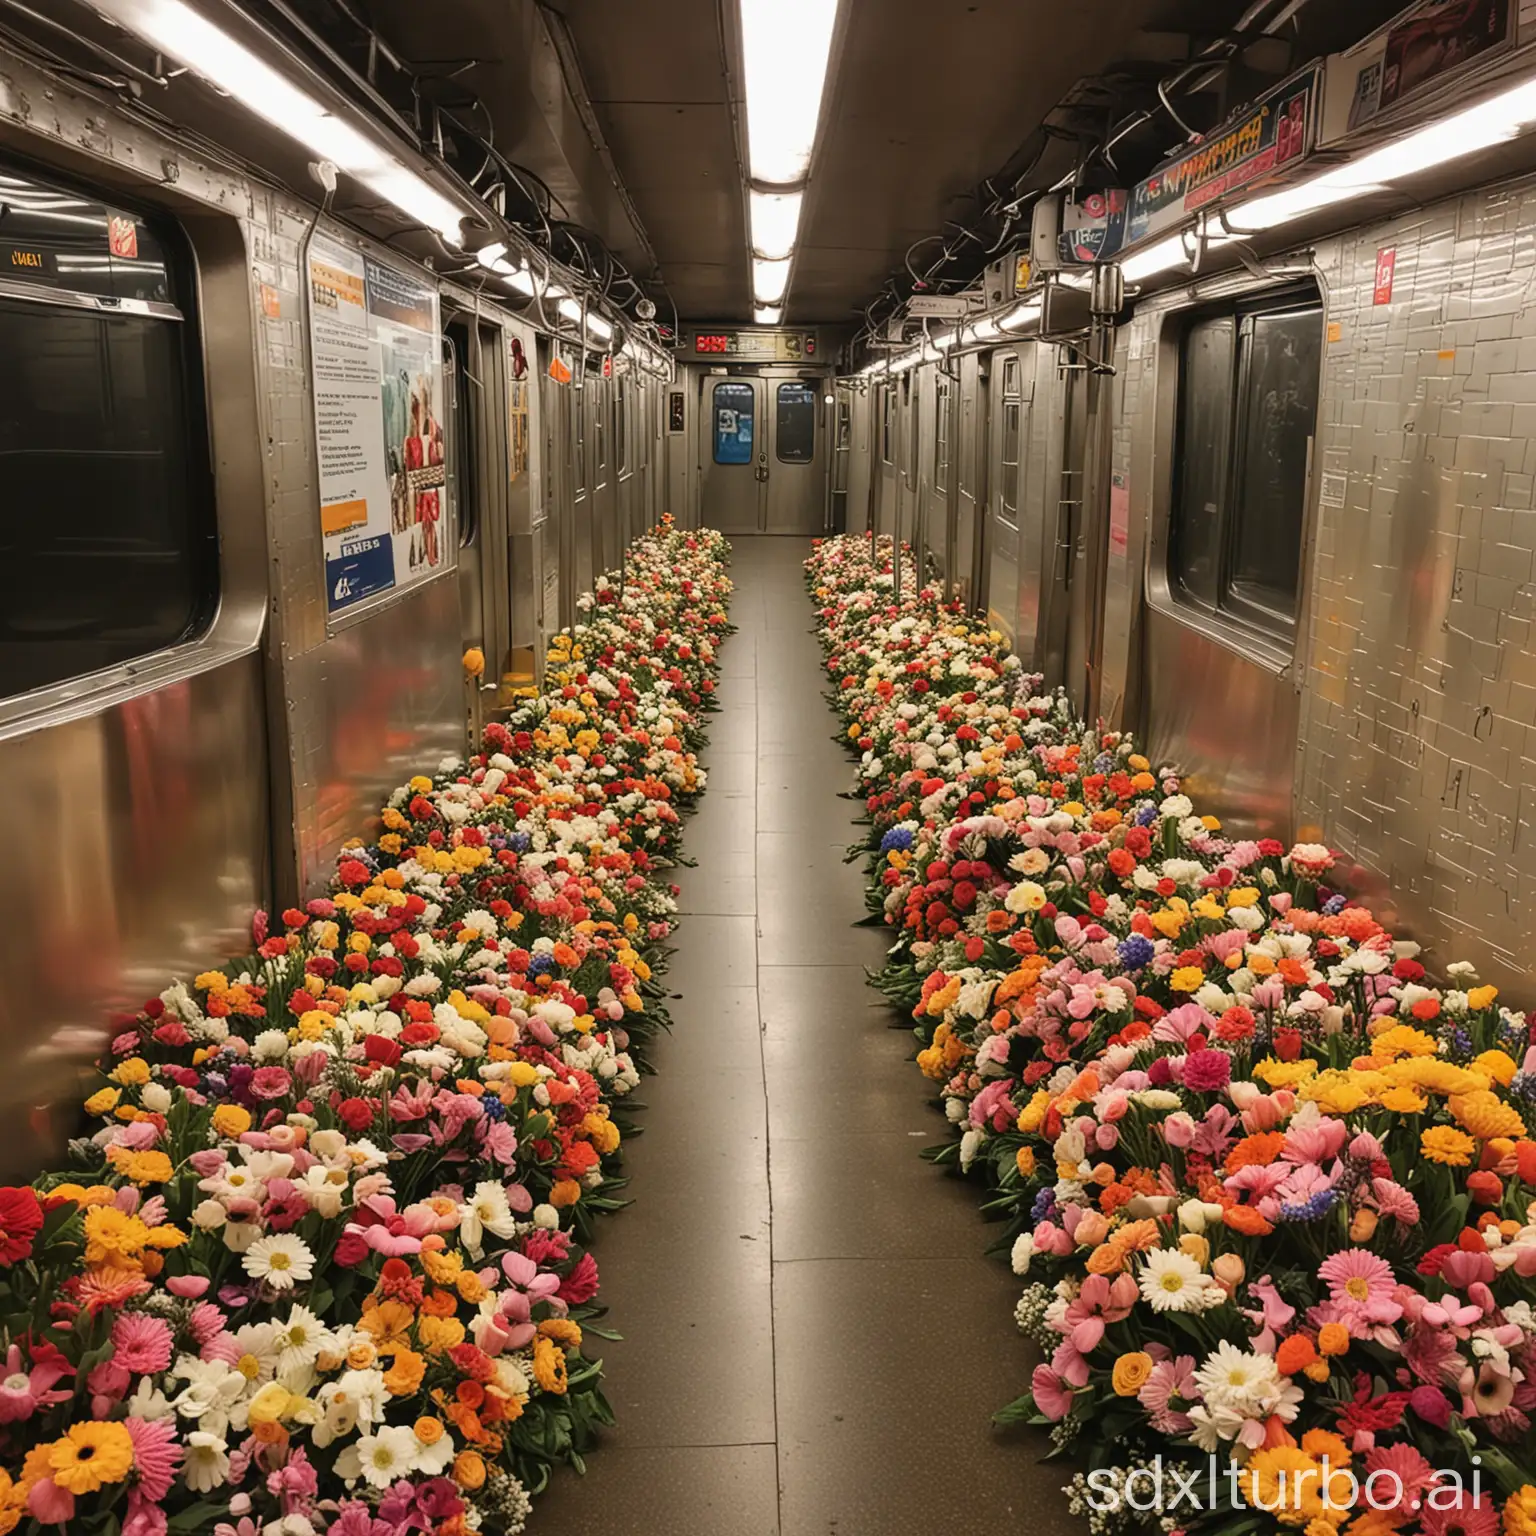 Colorful-Floral-Subway-A-Burst-of-Freshness-in-Urban-Transit